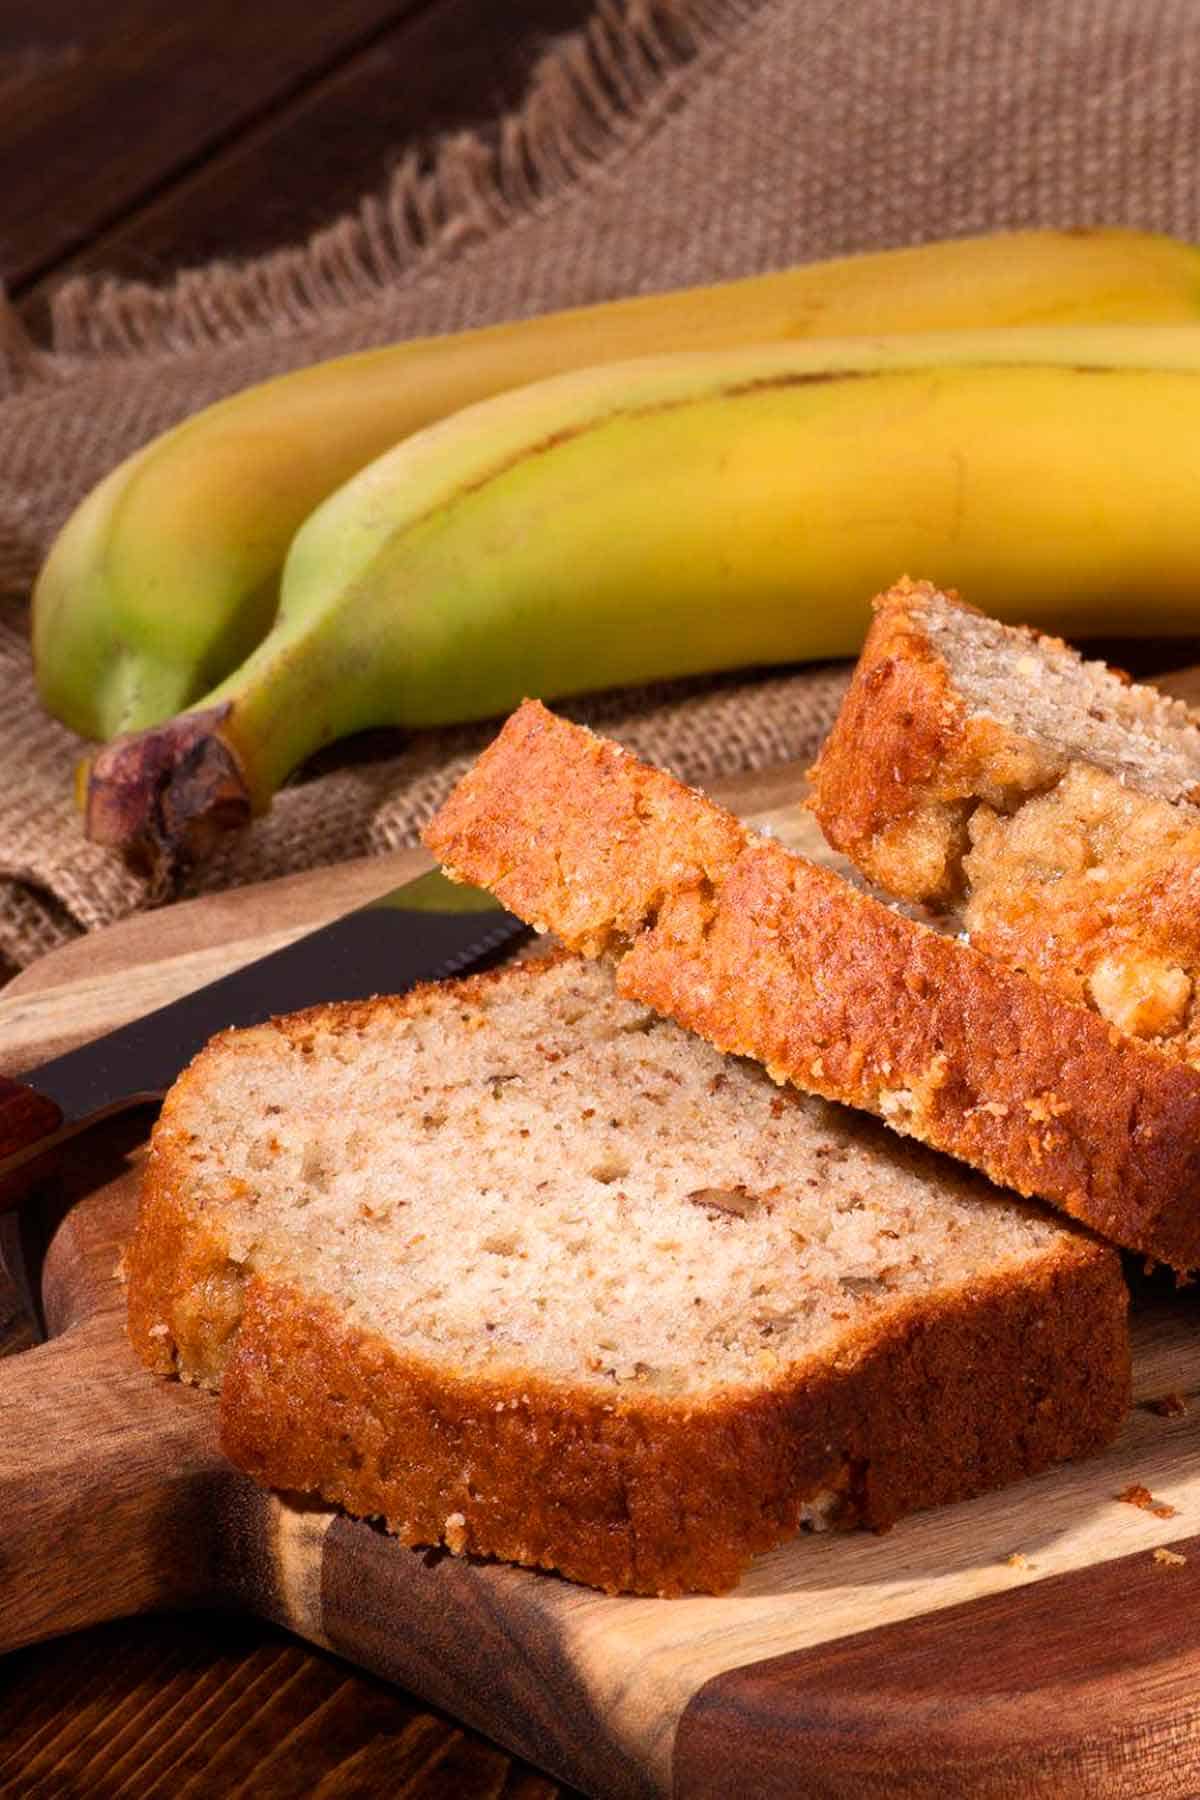 Banana bread on a wood cutting board and 2 bananas in the background